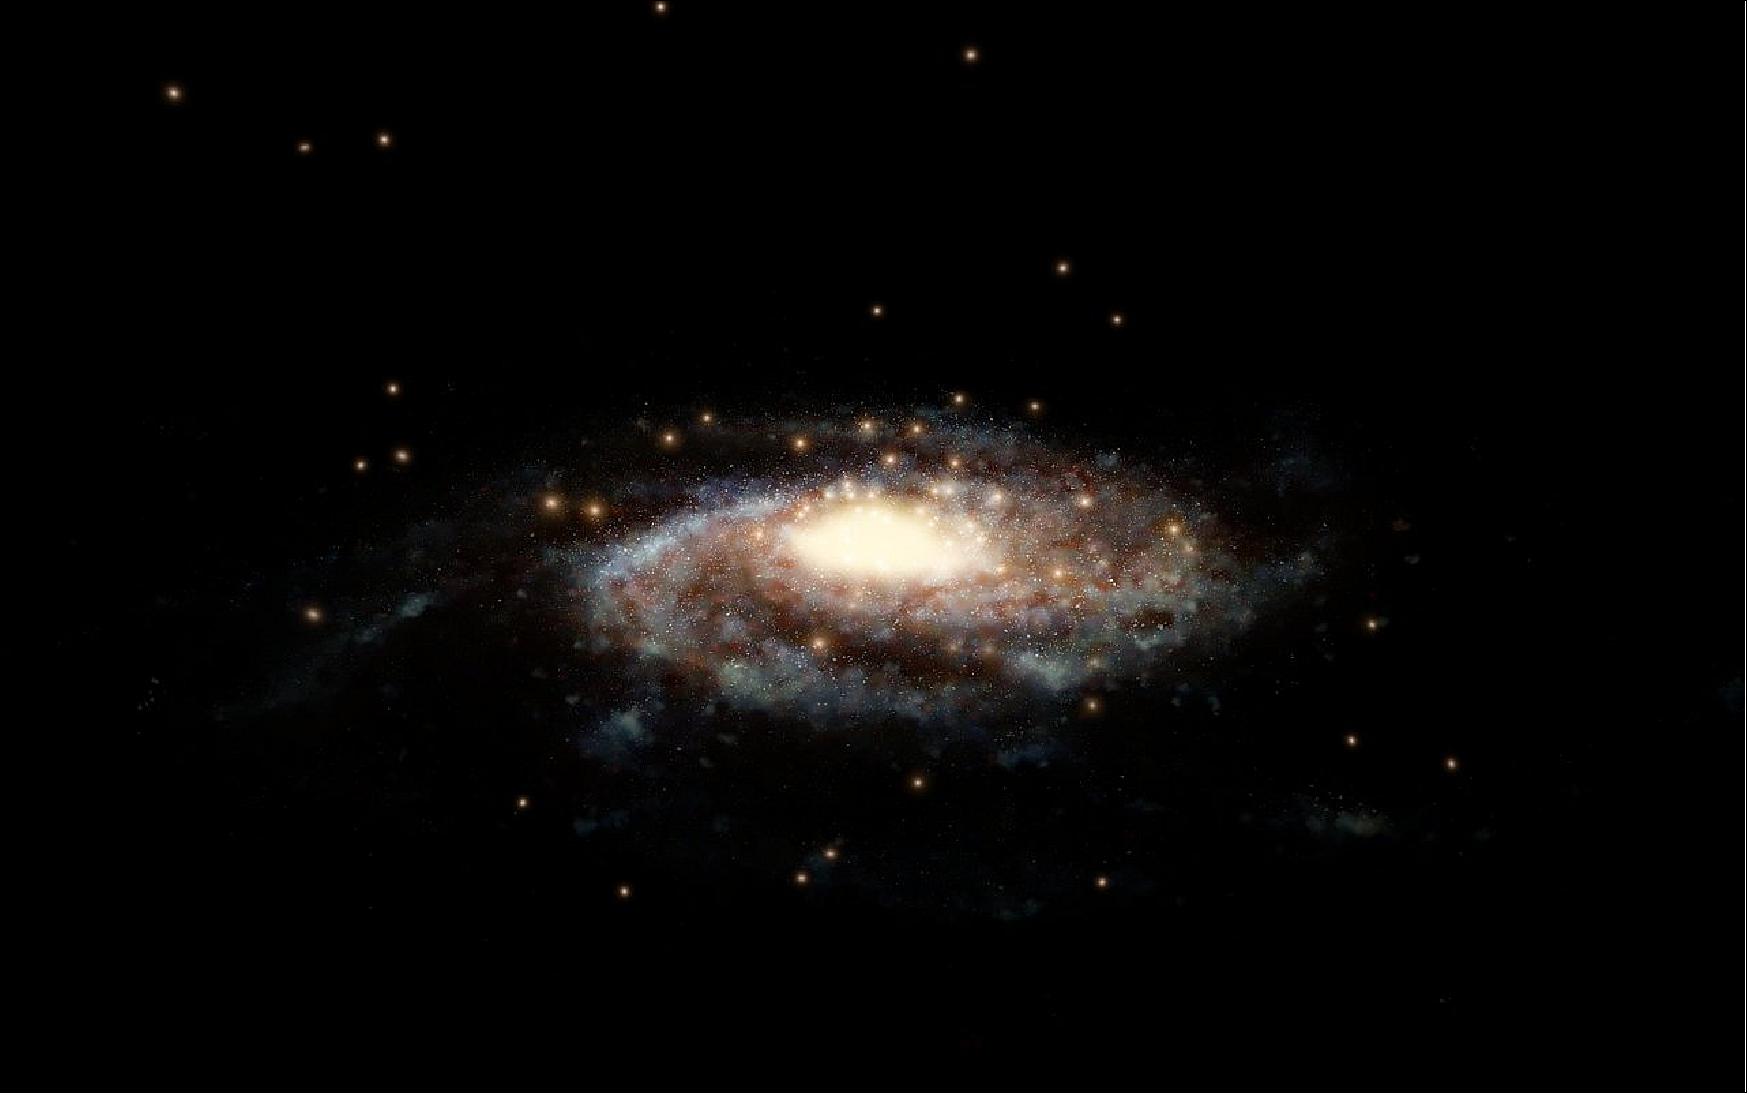 Figure 66: This artist's impression shows a computer generated model of the Milky Way and the accurate positions of the globular clusters used in this study surrounding it. Scientists used the measured velocities of these 44 globular clusters to determine the total mass of the Milky Way, our cosmic home. Satellite: Hubble Space Telescope (image credit: ESA/Hubble, NASA, L. Calçada)